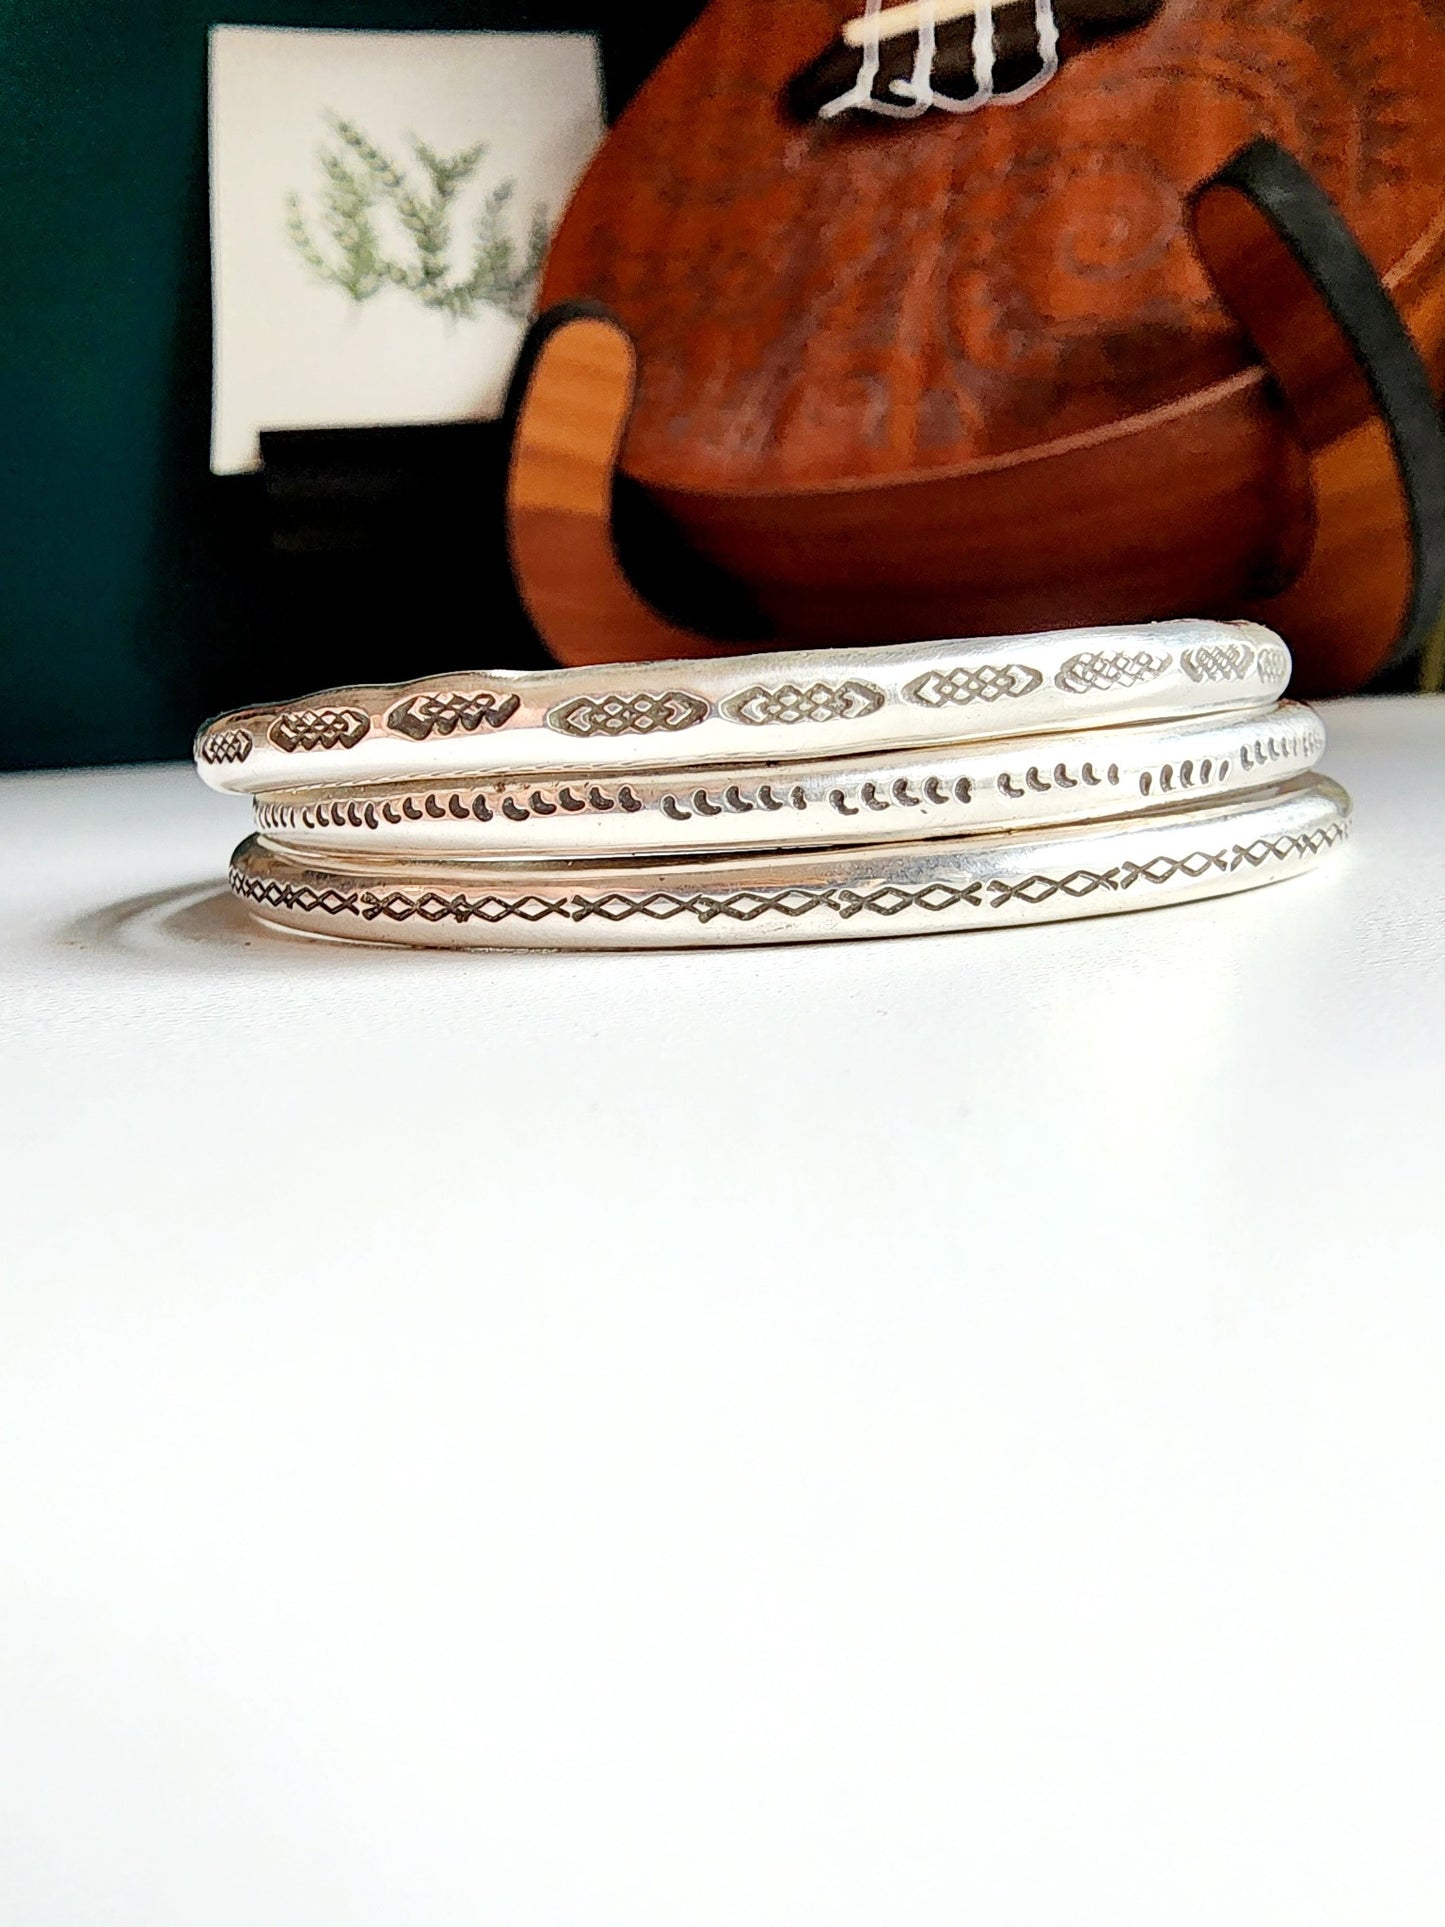 Stamped sterling silver cuff bracelet. Option one is a set of 5 small crescent moons, two is four interlocking triangles stamped continously, option 3 is four diamonds set right next to each other stamped continously.